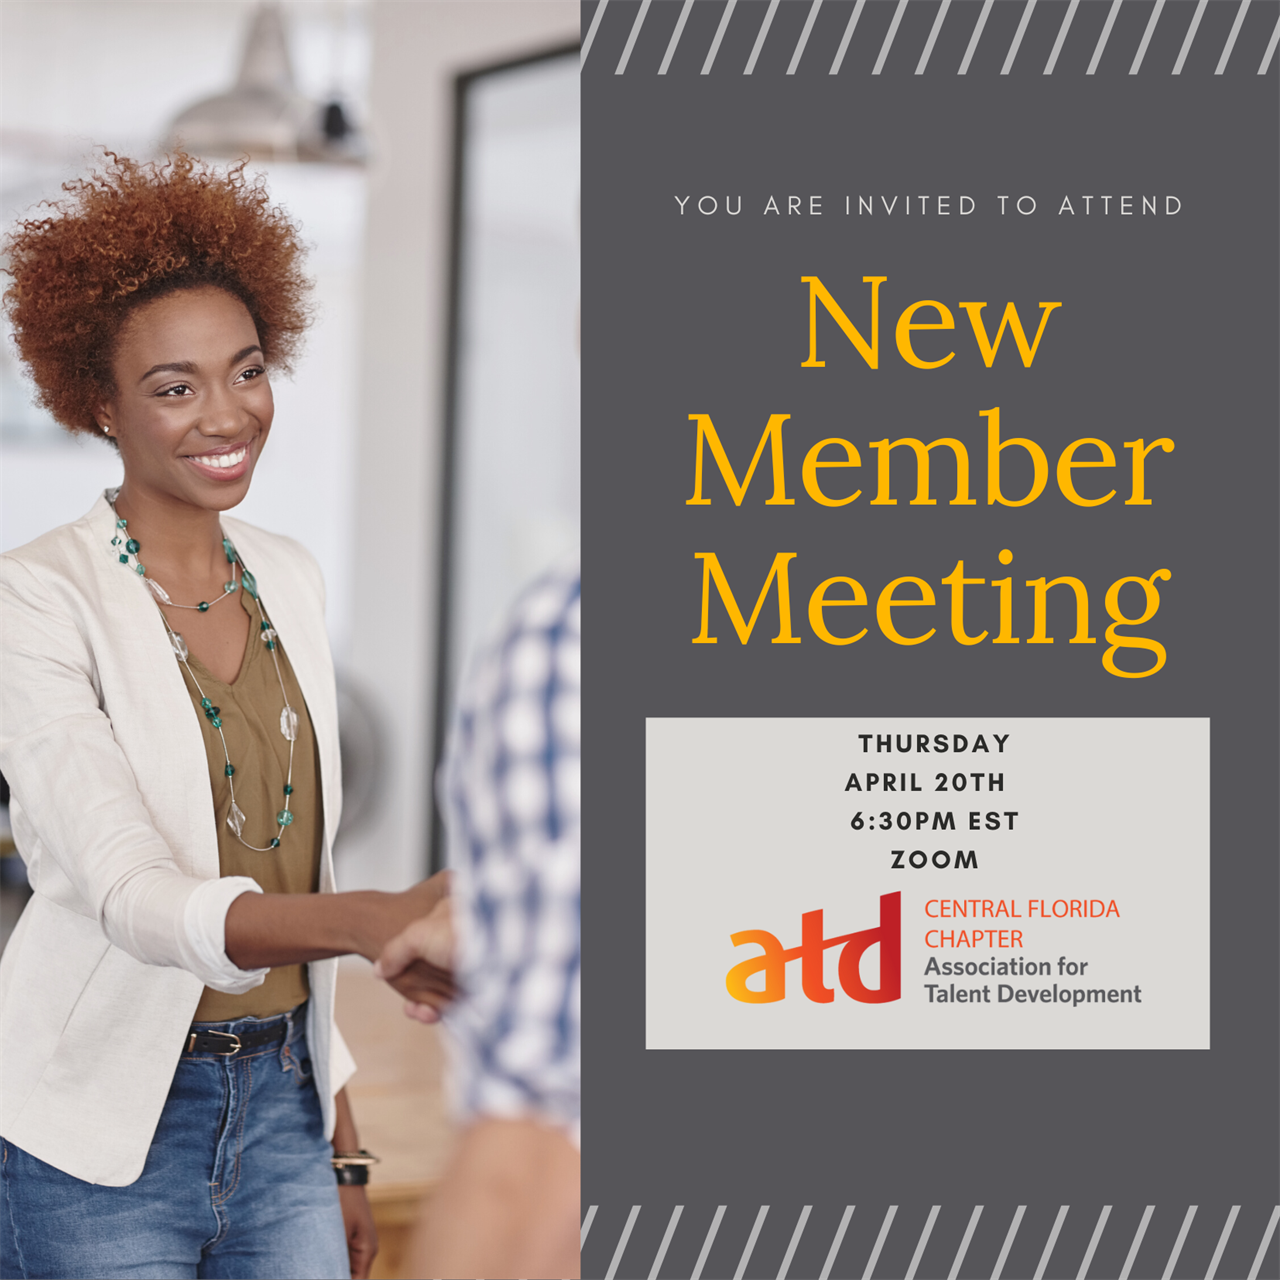 You are invited to attend New Member Meeting Thursday April 20th at 6:30 PM EST Zoom 